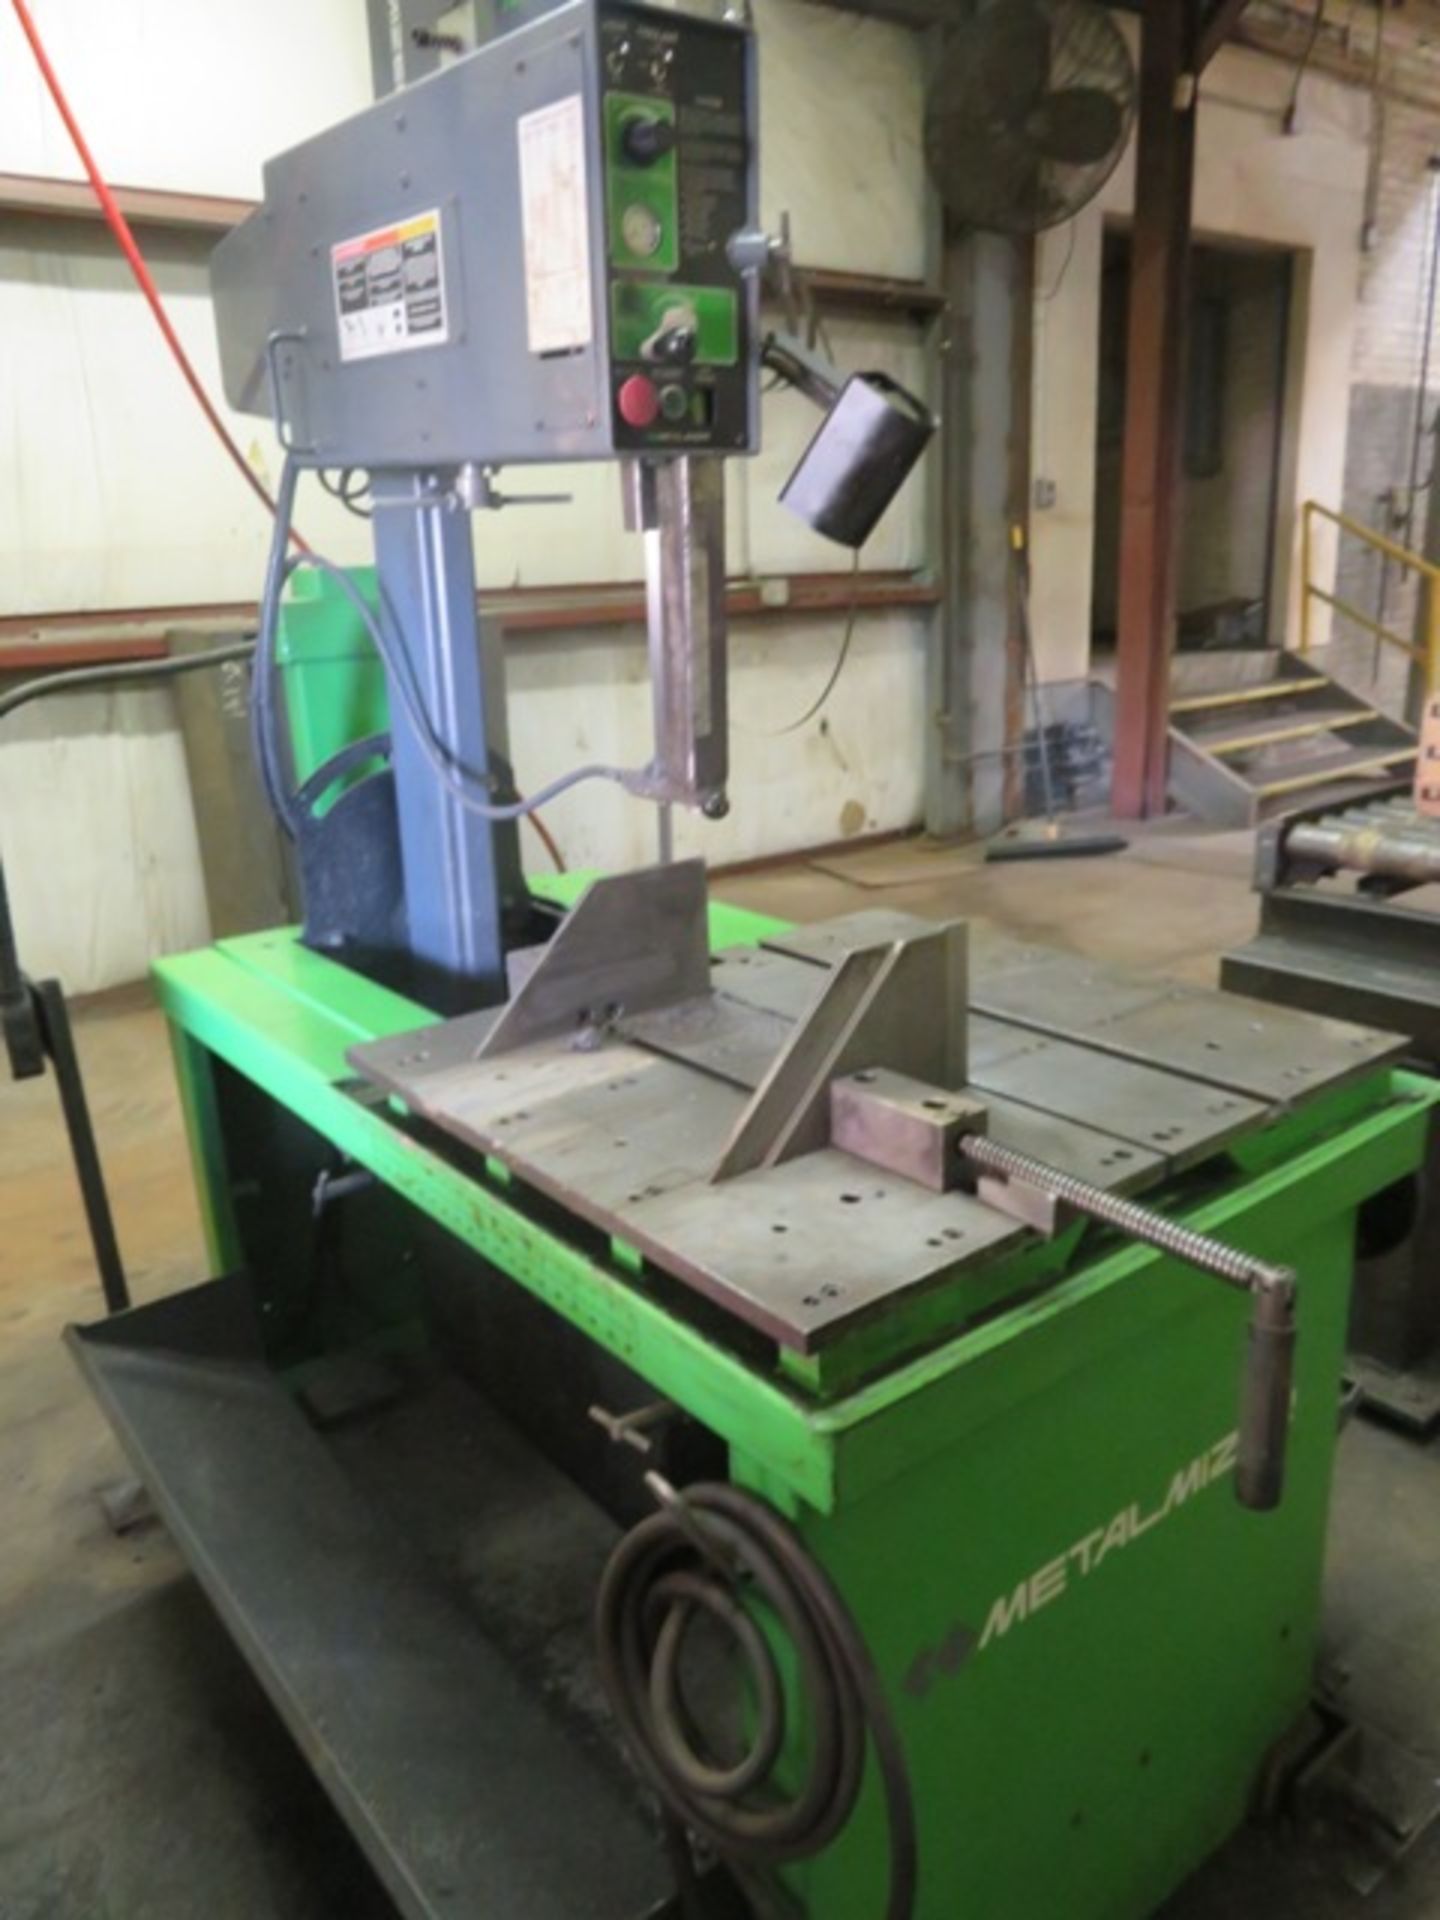 Metal Mizer Mdl. MV2018 Vertical Bandsaw, 460 Volts, 3 Phase, 2 hp, S/N MS0115904A - Image 4 of 5